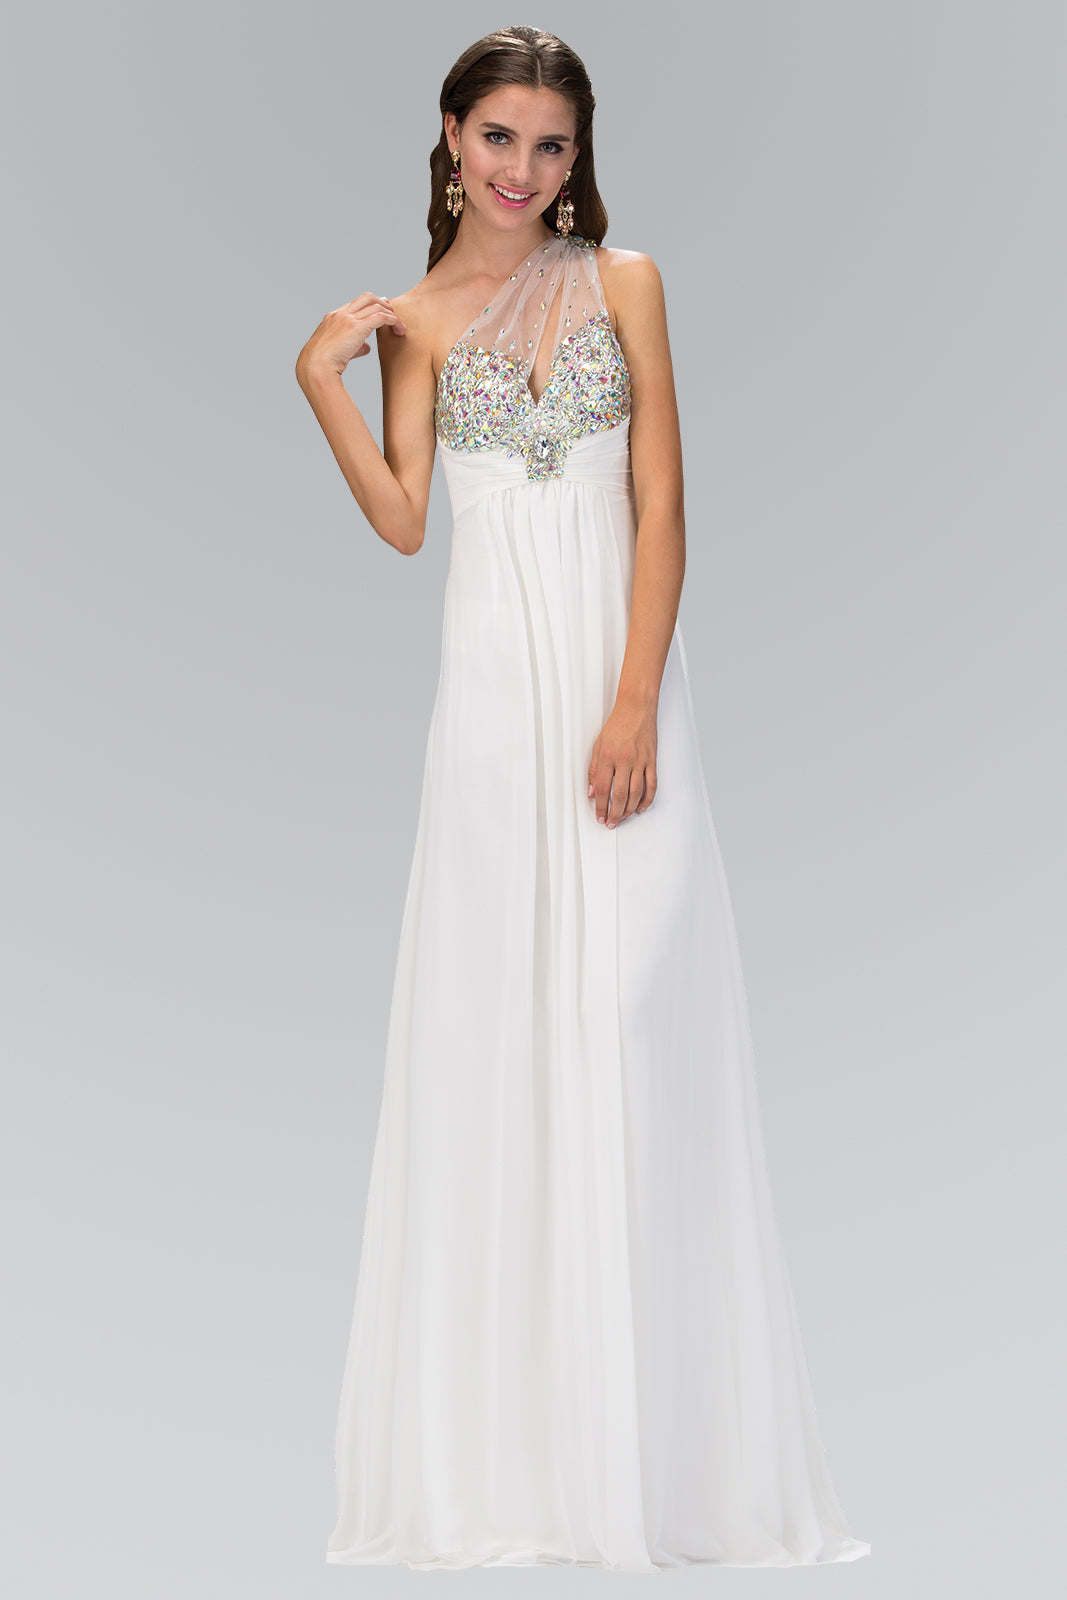 One Shoulder with Jewel Embellished Bodice and Ruched Waistline-smcdress